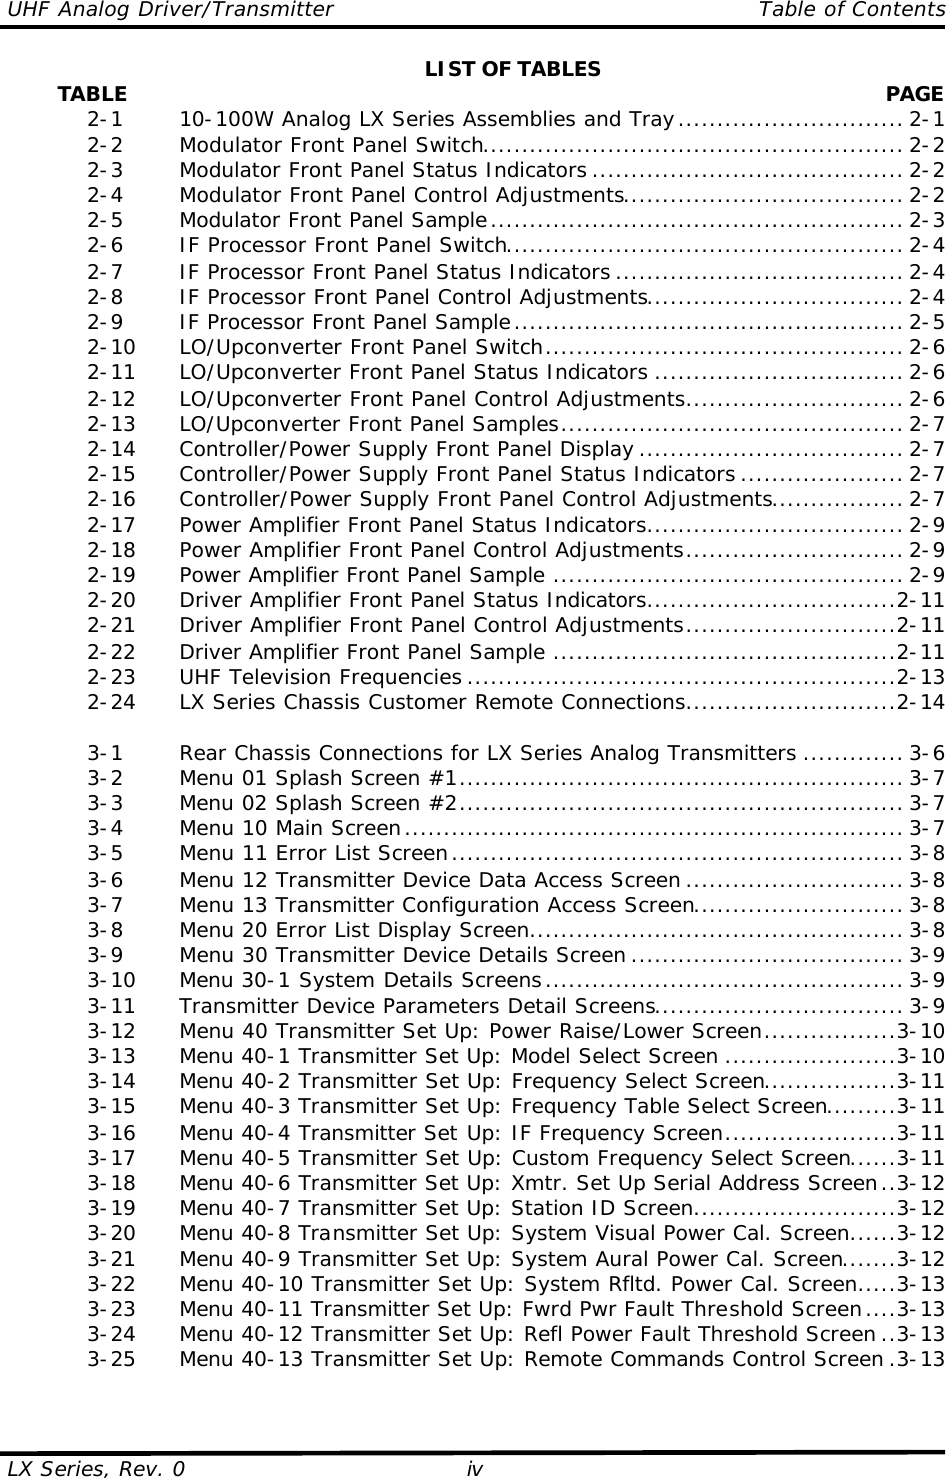 UHF Analog Driver/Transmitter    Table of Contents  LX Series, Rev. 0 iv LIST OF TABLES         TABLE  PAGE  2-1   10-100W Analog LX Series Assemblies and Tray............................. 2-1  2-2   Modulator Front Panel Switch...................................................... 2-2  2-3   Modulator Front Panel Status Indicators ........................................ 2-2  2-4   Modulator Front Panel Control Adjustments.................................... 2-2  2-5   Modulator Front Panel Sample..................................................... 2-3  2-6   IF Processor Front Panel Switch................................................... 2-4  2-7   IF Processor Front Panel Status Indicators ..................................... 2-4  2-8   IF Processor Front Panel Control Adjustments................................. 2-4  2-9   IF Processor Front Panel Sample.................................................. 2-5  2-10 LO/Upconverter Front Panel Switch.............................................. 2-6  2-11 LO/Upconverter Front Panel Status Indicators ................................ 2-6  2-12 LO/Upconverter Front Panel Control Adjustments............................ 2-6  2-13 LO/Upconverter Front Panel Samples............................................ 2-7  2-14 Controller/Power Supply Front Panel Display .................................. 2-7  2-15 Controller/Power Supply Front Panel Status Indicators ..................... 2-7  2-16 Controller/Power Supply Front Panel Control Adjustments................. 2-7  2-17 Power Amplifier Front Panel Status Indicators................................. 2-9  2-18 Power Amplifier Front Panel Control Adjustments............................ 2-9  2-19 Power Amplifier Front Panel Sample ............................................. 2-9  2-20 Driver Amplifier Front Panel Status Indicators................................2-11  2-21 Driver Amplifier Front Panel Control Adjustments...........................2-11  2-22 Driver Amplifier Front Panel Sample ............................................2-11  2-23 UHF Television Frequencies .......................................................2-13  2-24 LX Series Chassis Customer Remote Connections...........................2-14   3-1   Rear Chassis Connections for LX Series Analog Transmitters ............. 3-6  3-2   Menu 01 Splash Screen #1......................................................... 3-7  3-3   Menu 02 Splash Screen #2......................................................... 3-7  3-4   Menu 10 Main Screen................................................................ 3-7  3-5   Menu 11 Error List Screen.......................................................... 3-8  3-6   Menu 12 Transmitter Device Data Access Screen ............................ 3-8  3-7   Menu 13 Transmitter Configuration Access Screen........................... 3-8  3-8   Menu 20 Error List Display Screen................................................ 3-8  3-9   Menu 30 Transmitter Device Details Screen ................................... 3-9  3-10 Menu 30-1 System Details Screens.............................................. 3-9  3-11 Transmitter Device Parameters Detail Screens................................ 3-9  3-12 Menu 40 Transmitter Set Up: Power Raise/Lower Screen.................3-10  3-13 Menu 40-1 Transmitter Set Up: Model Select Screen ......................3-10  3-14 Menu 40-2 Transmitter Set Up: Frequency Select Screen.................3-11  3-15 Menu 40-3 Transmitter Set Up: Frequency Table Select Screen.........3-11  3-16 Menu 40-4 Transmitter Set Up: IF Frequency Screen......................3-11  3-17 Menu 40-5 Transmitter Set Up: Custom Frequency Select Screen......3-11  3-18 Menu 40-6 Transmitter Set Up: Xmtr. Set Up Serial Address Screen..3-12  3-19 Menu 40-7 Transmitter Set Up: Station ID Screen..........................3-12  3-20 Menu 40-8 Transmitter Set Up: System Visual Power Cal. Screen......3-12  3-21 Menu 40-9 Transmitter Set Up: System Aural Power Cal. Screen.......3-12  3-22 Menu 40-10 Transmitter Set Up: System Rfltd. Power Cal. Screen.....3-13  3-23 Menu 40-11 Transmitter Set Up: Fwrd Pwr Fault Threshold Screen....3-13  3-24 Menu 40-12 Transmitter Set Up: Refl Power Fault Threshold Screen ..3-13  3-25 Menu 40-13 Transmitter Set Up: Remote Commands Control Screen .3-13  